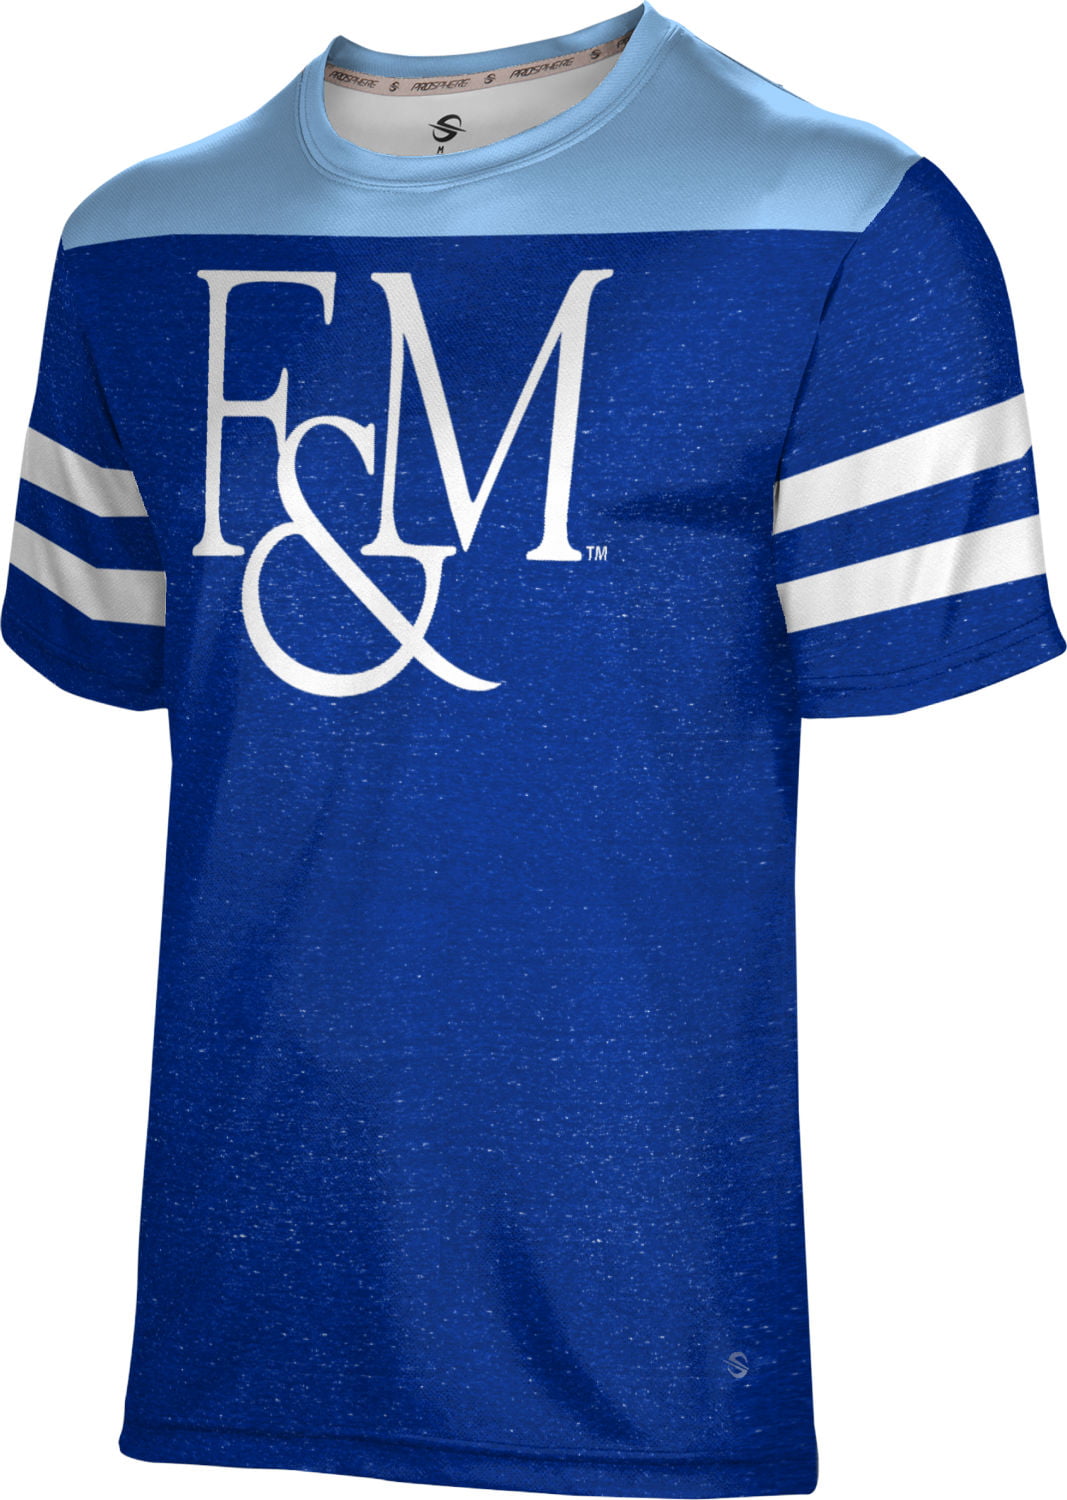 Heathered ProSphere Franklin & Marshall College Mens Performance T-Shirt